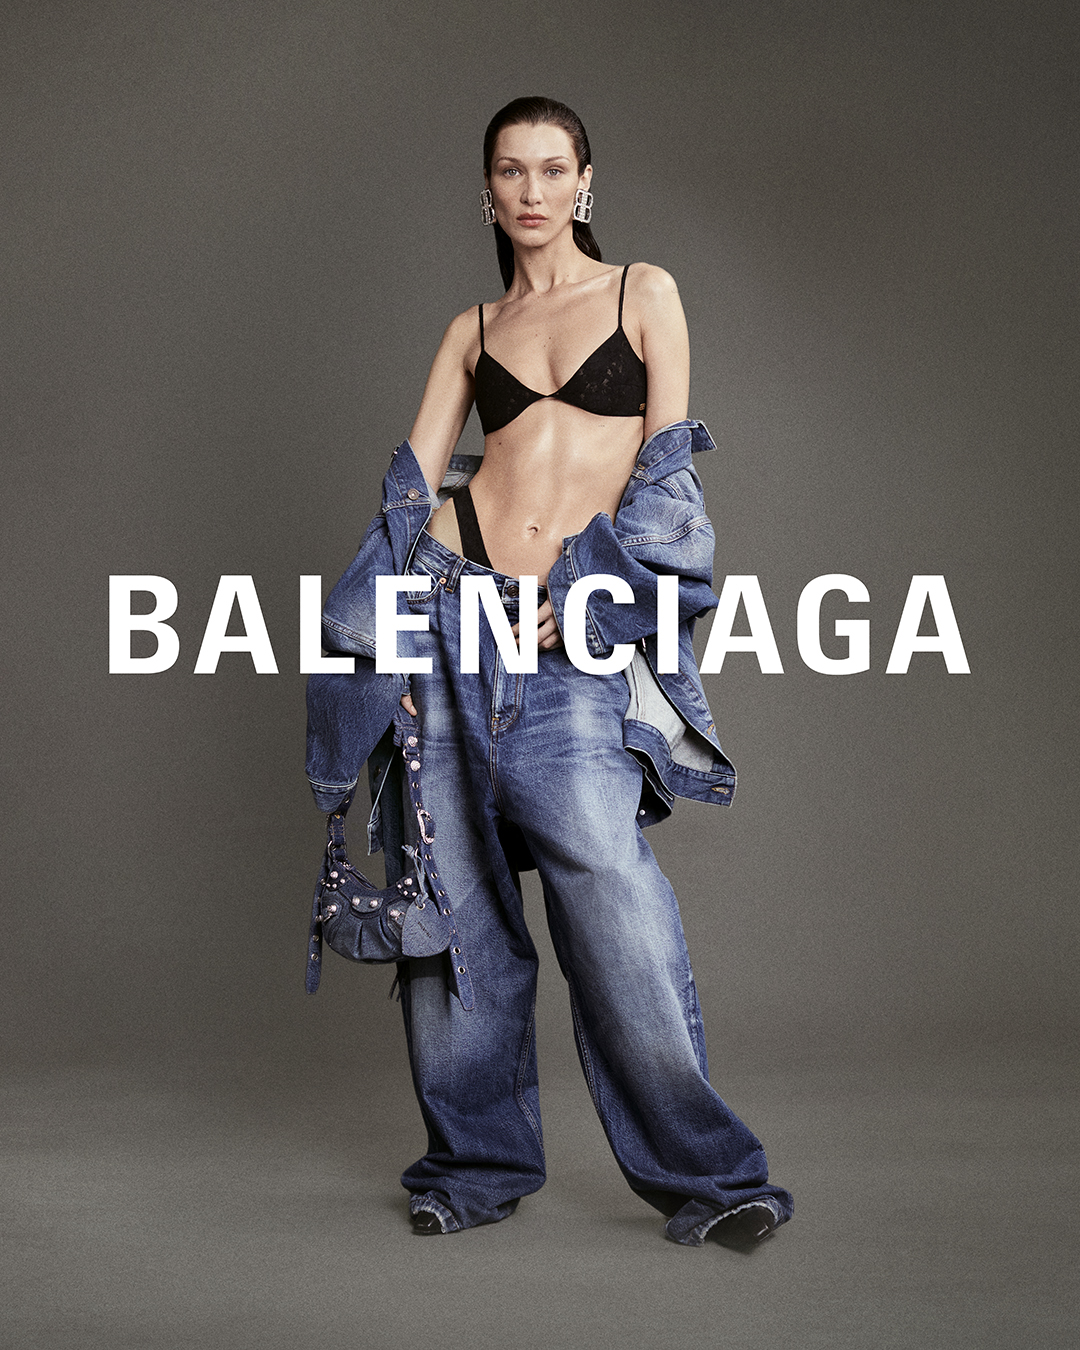 Balenciaga Shows During Paris Fashion Week After Inappropriate Ad  E  Online